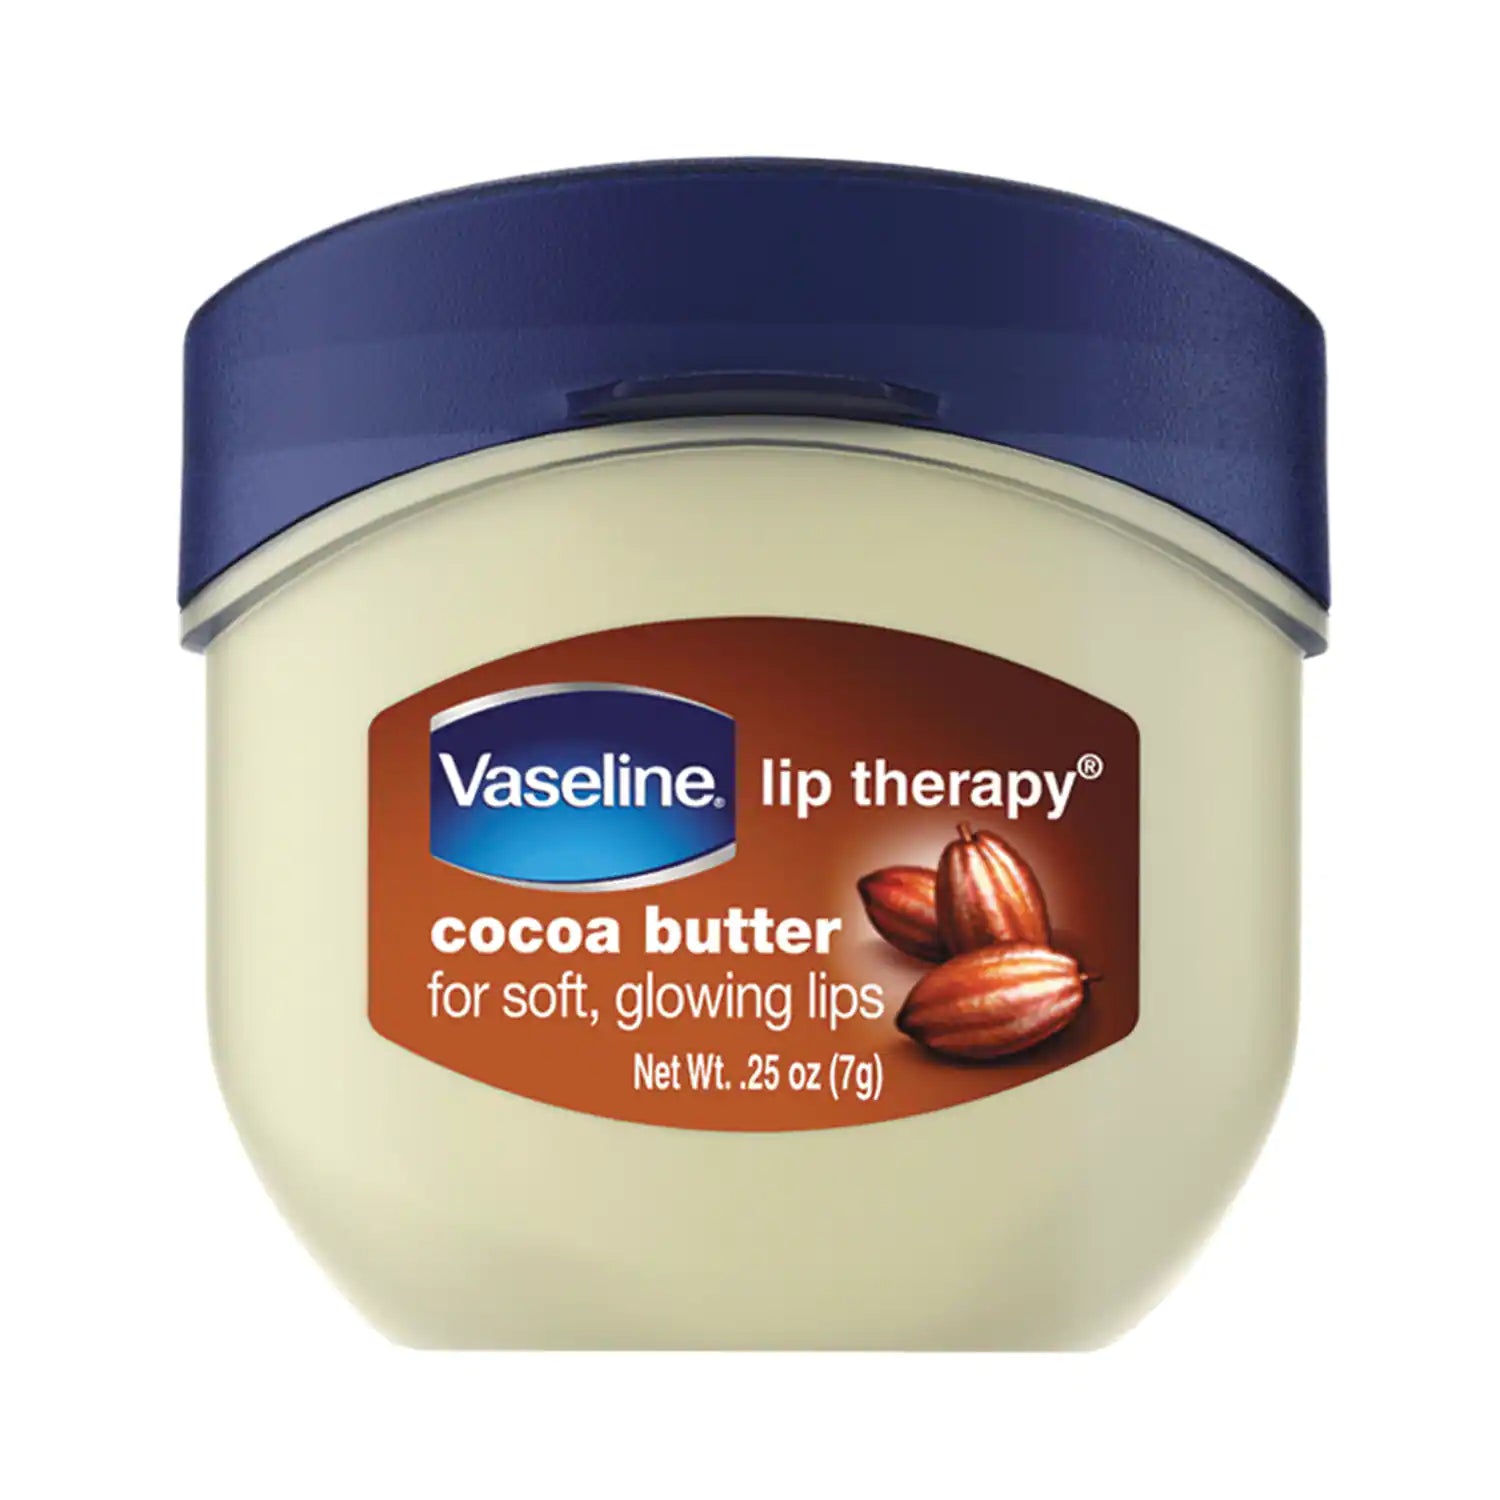 Vaseline Cocoa Butter Lip Therapy 7g - DoctorOnCall Online Pharmacy